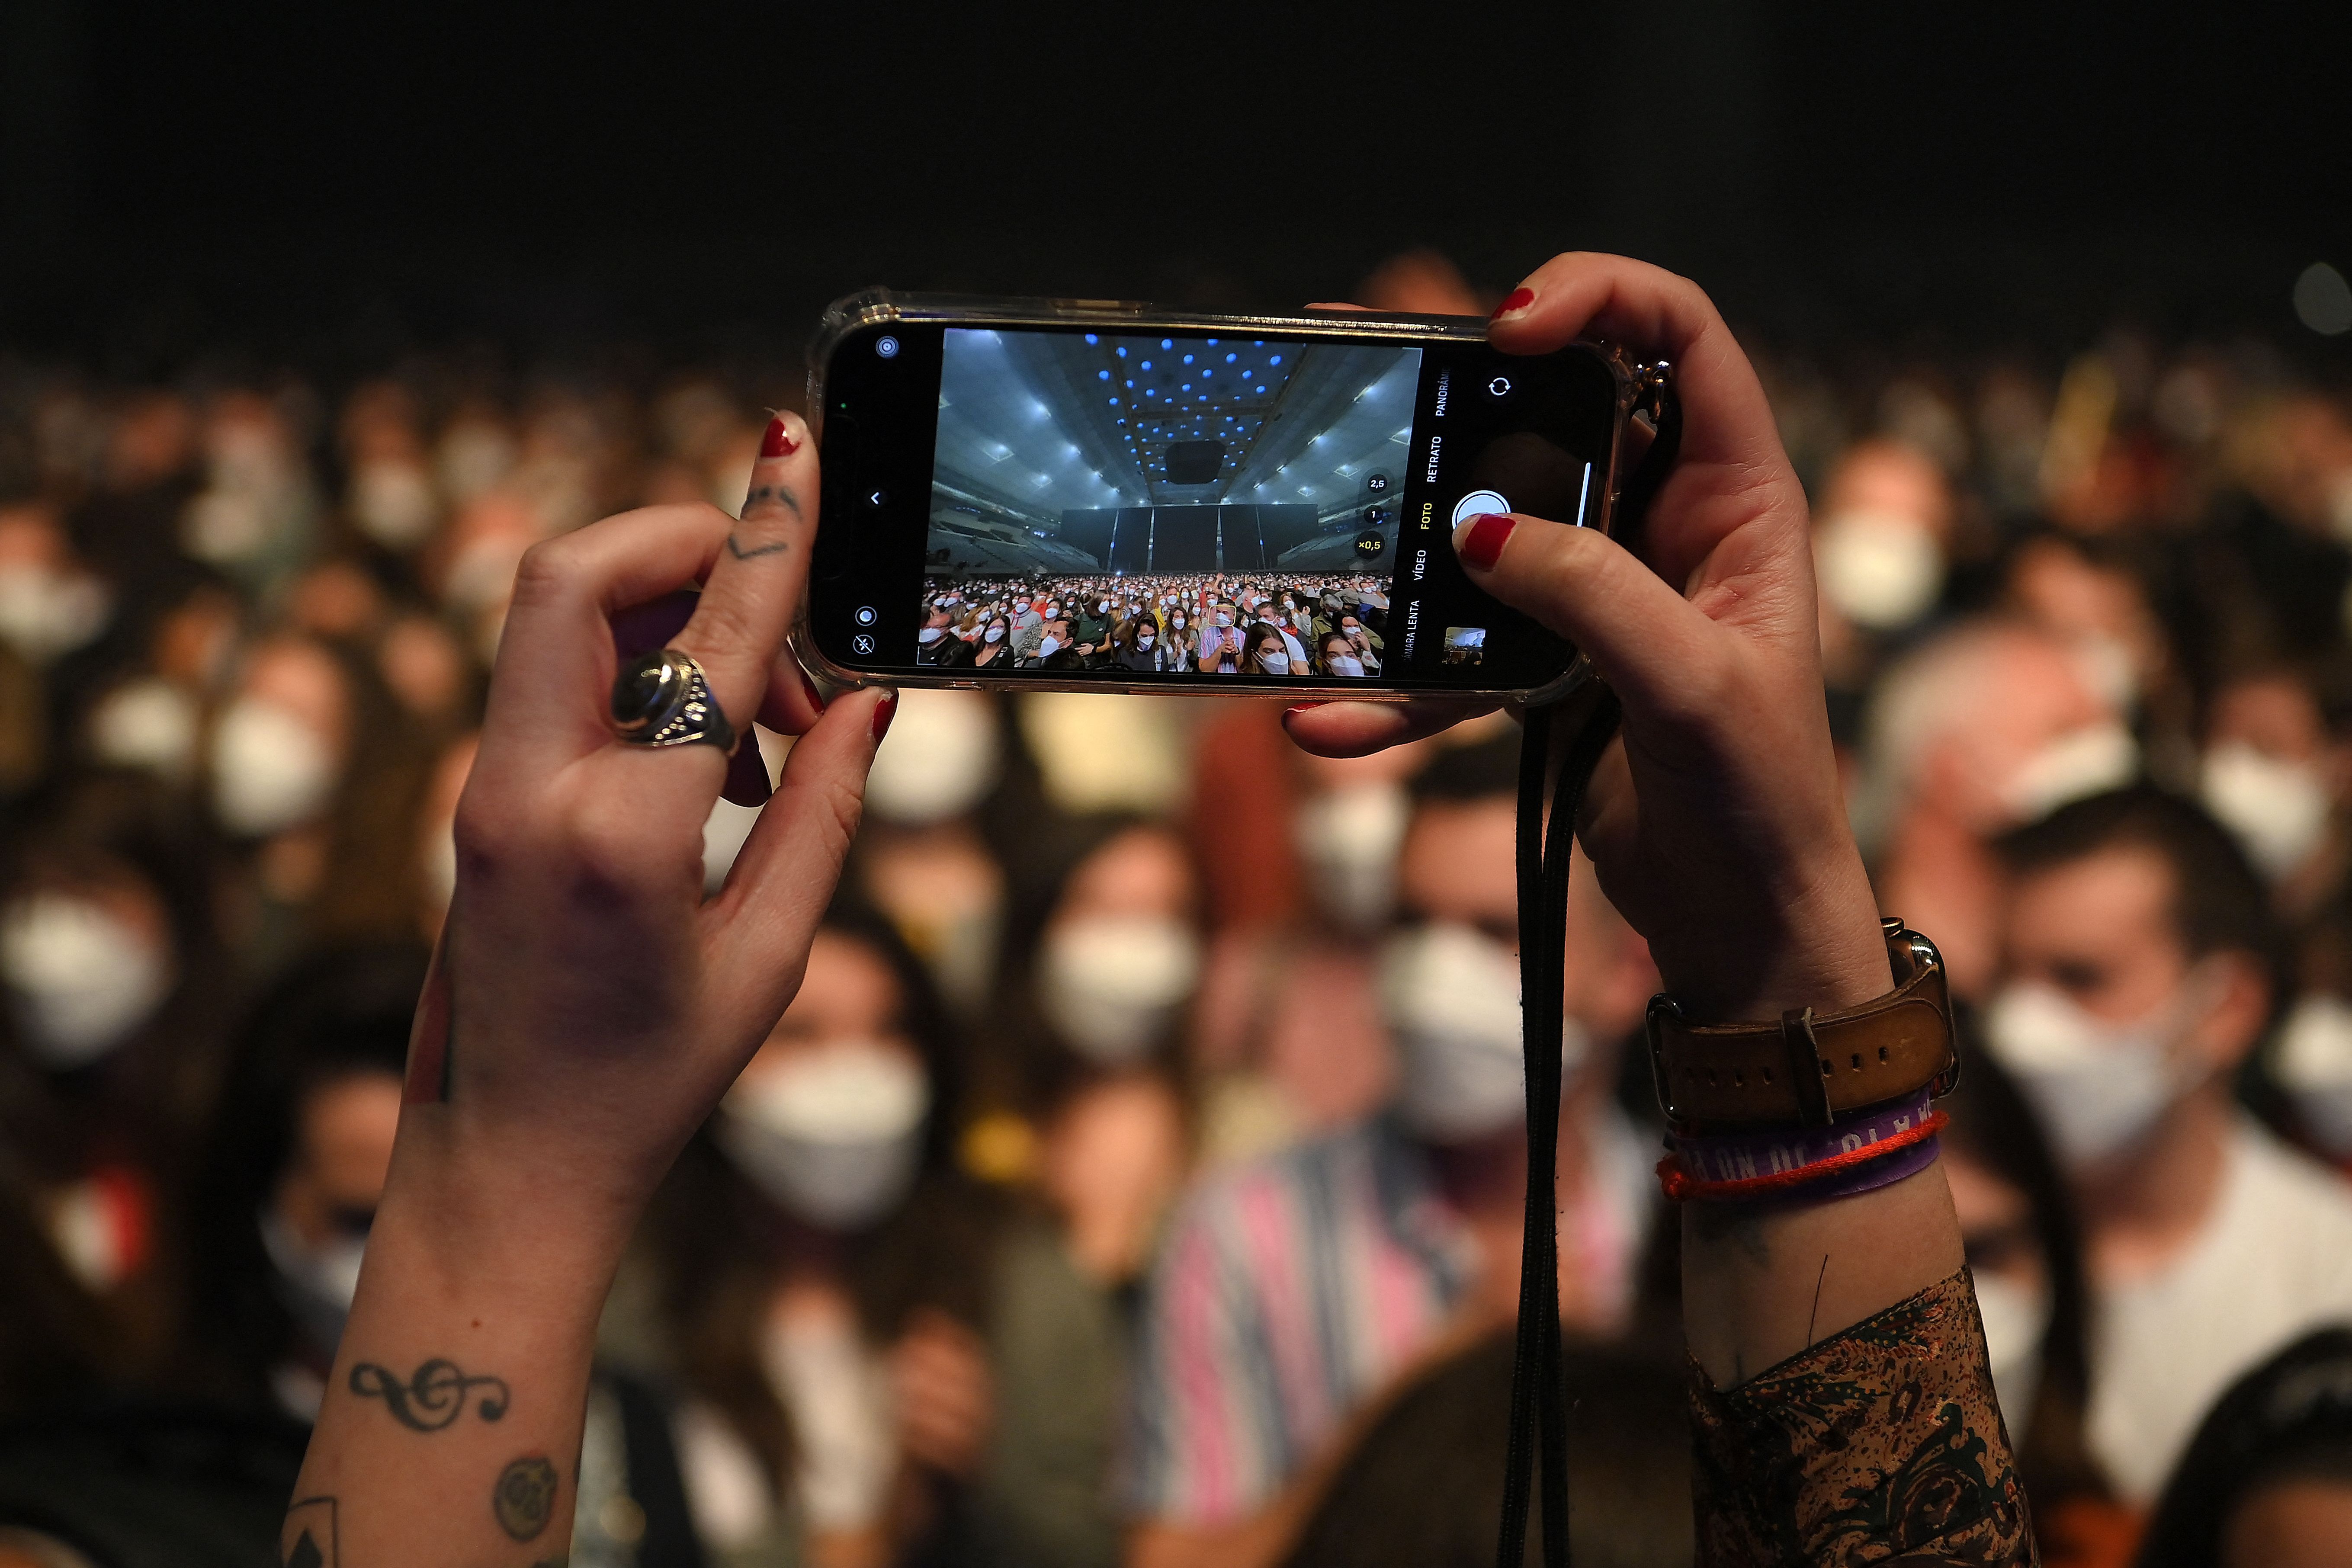 A spectator takes a picture before the start of a rock music concert by Spanish group Love of Lesbian at the Palau Sant Jordi in Barcelona on March 27